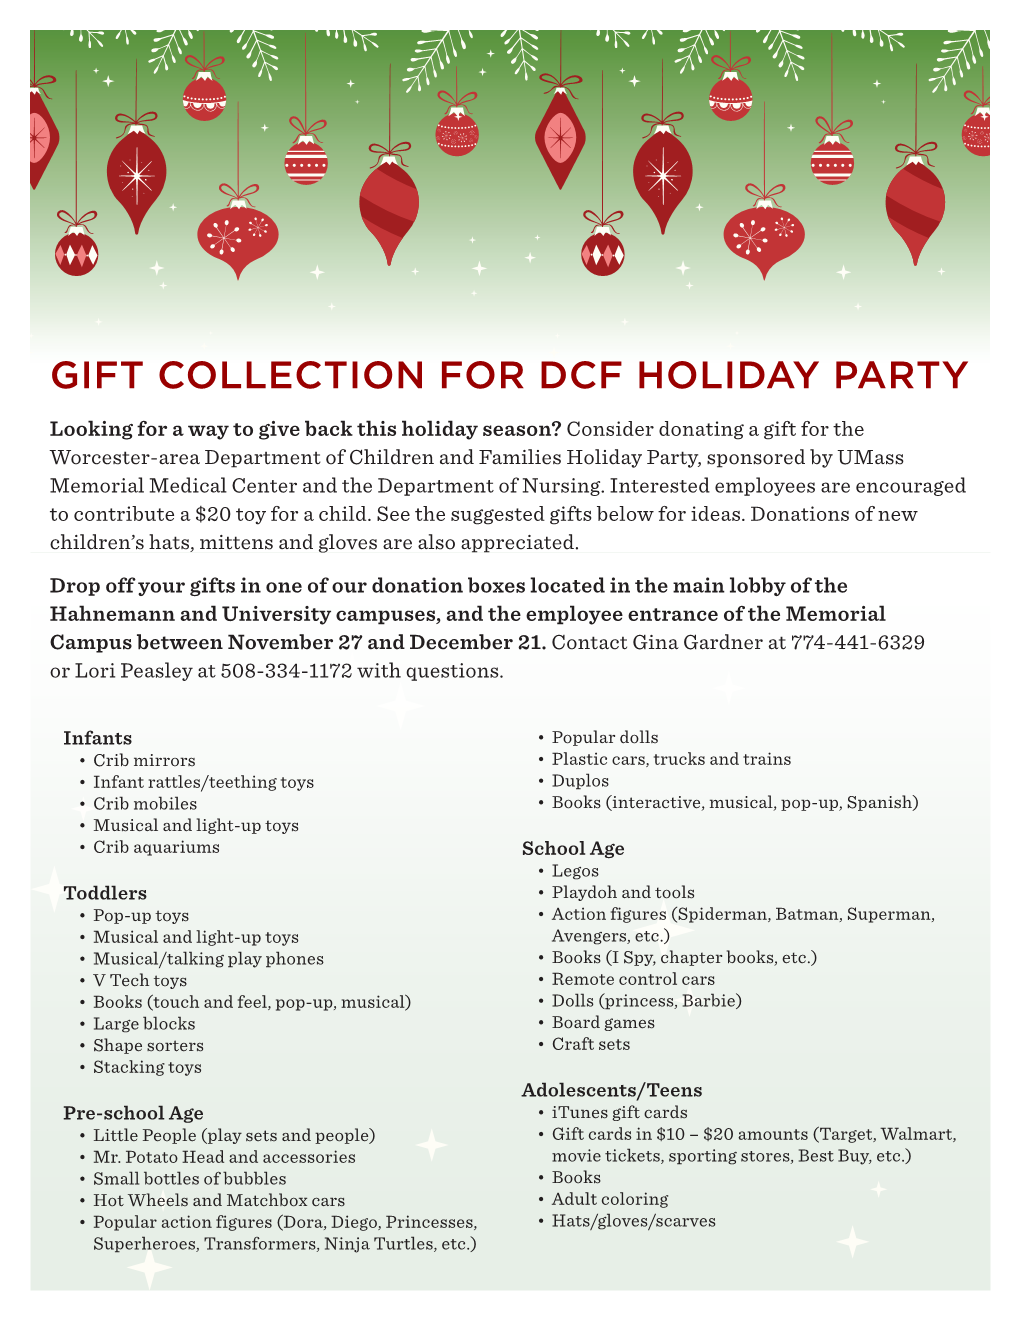 Gift Collection for Dcf Holiday Party